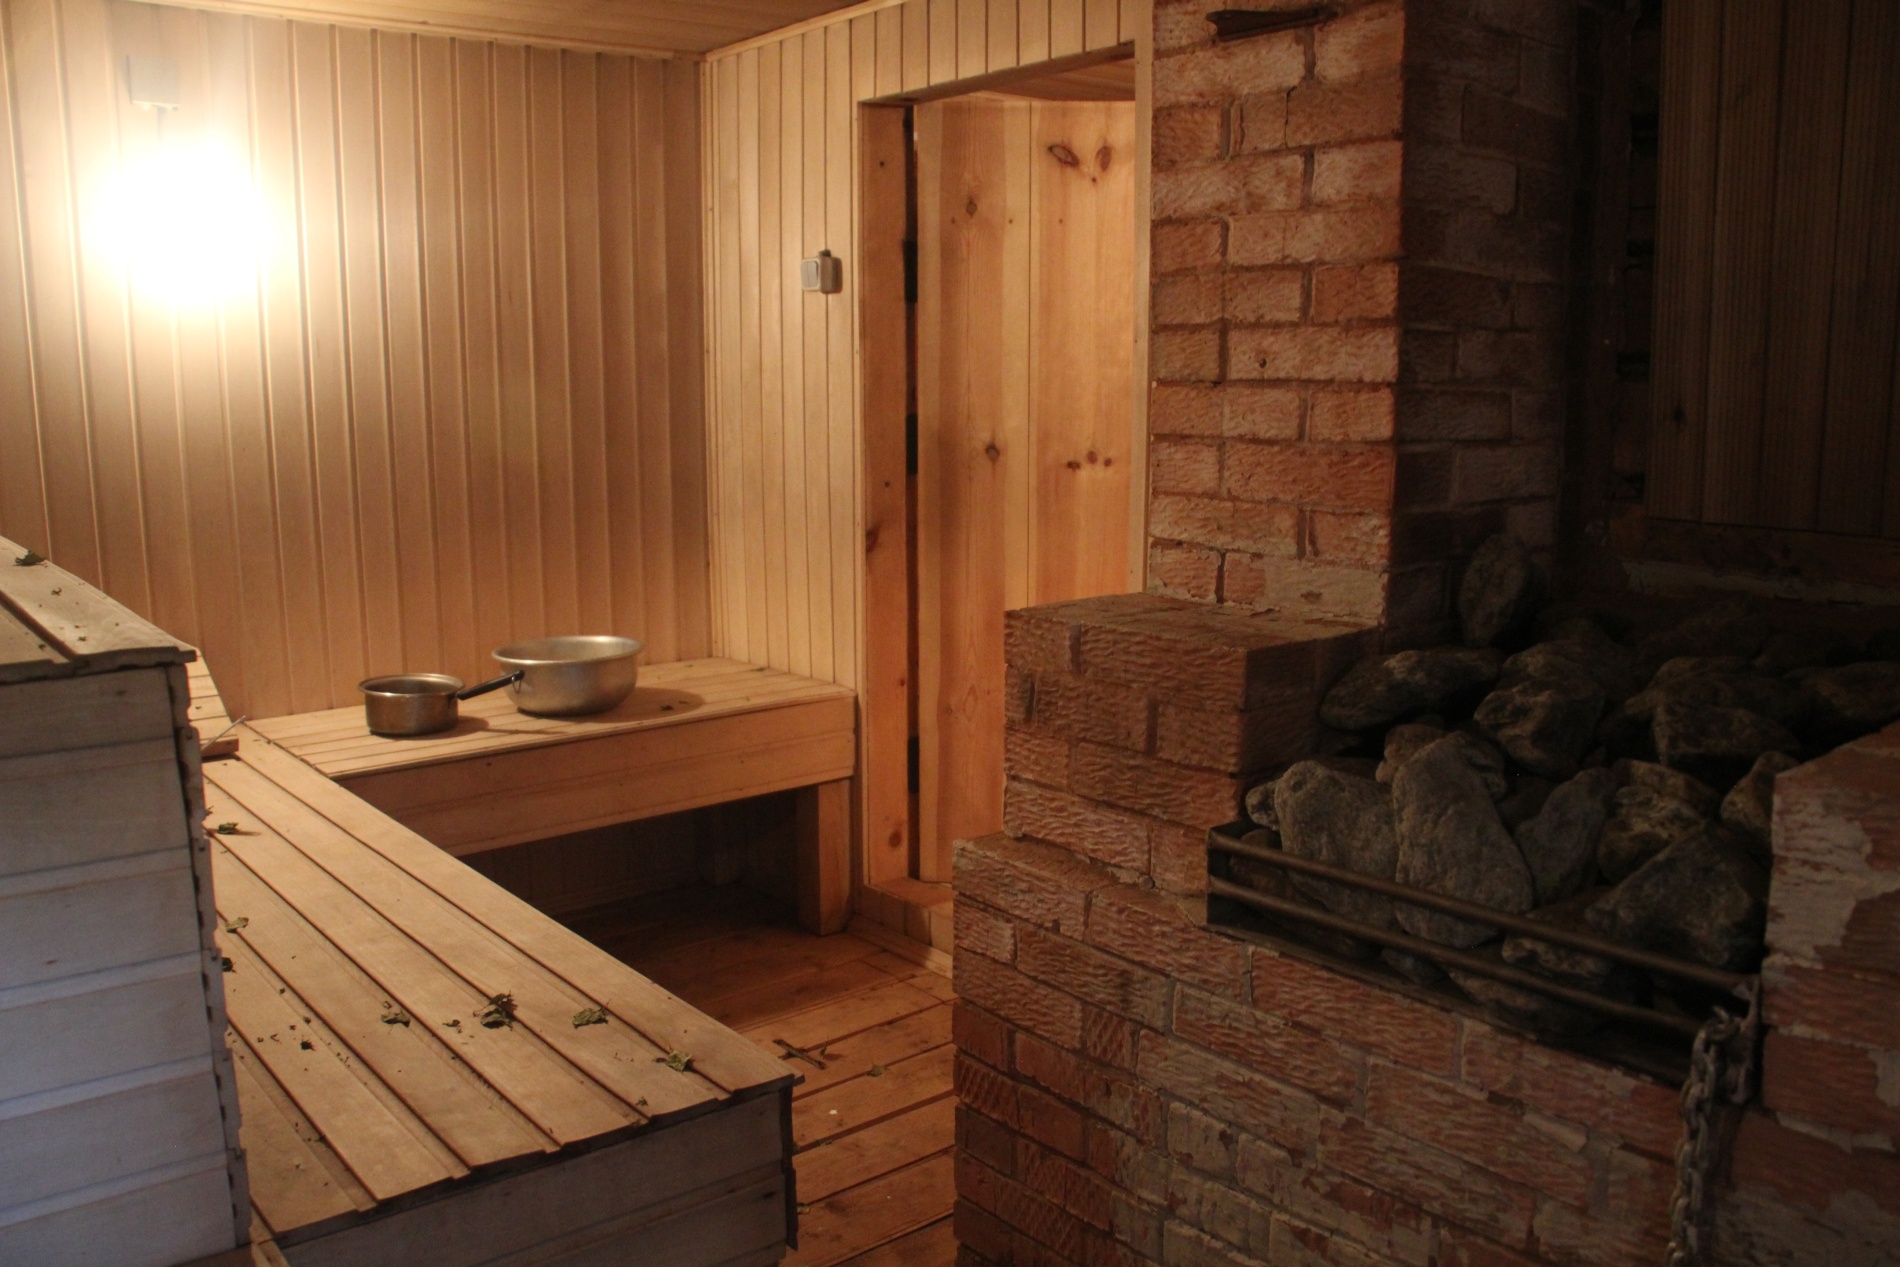 Inside a Russian banya, wooden benches wait for bathers.